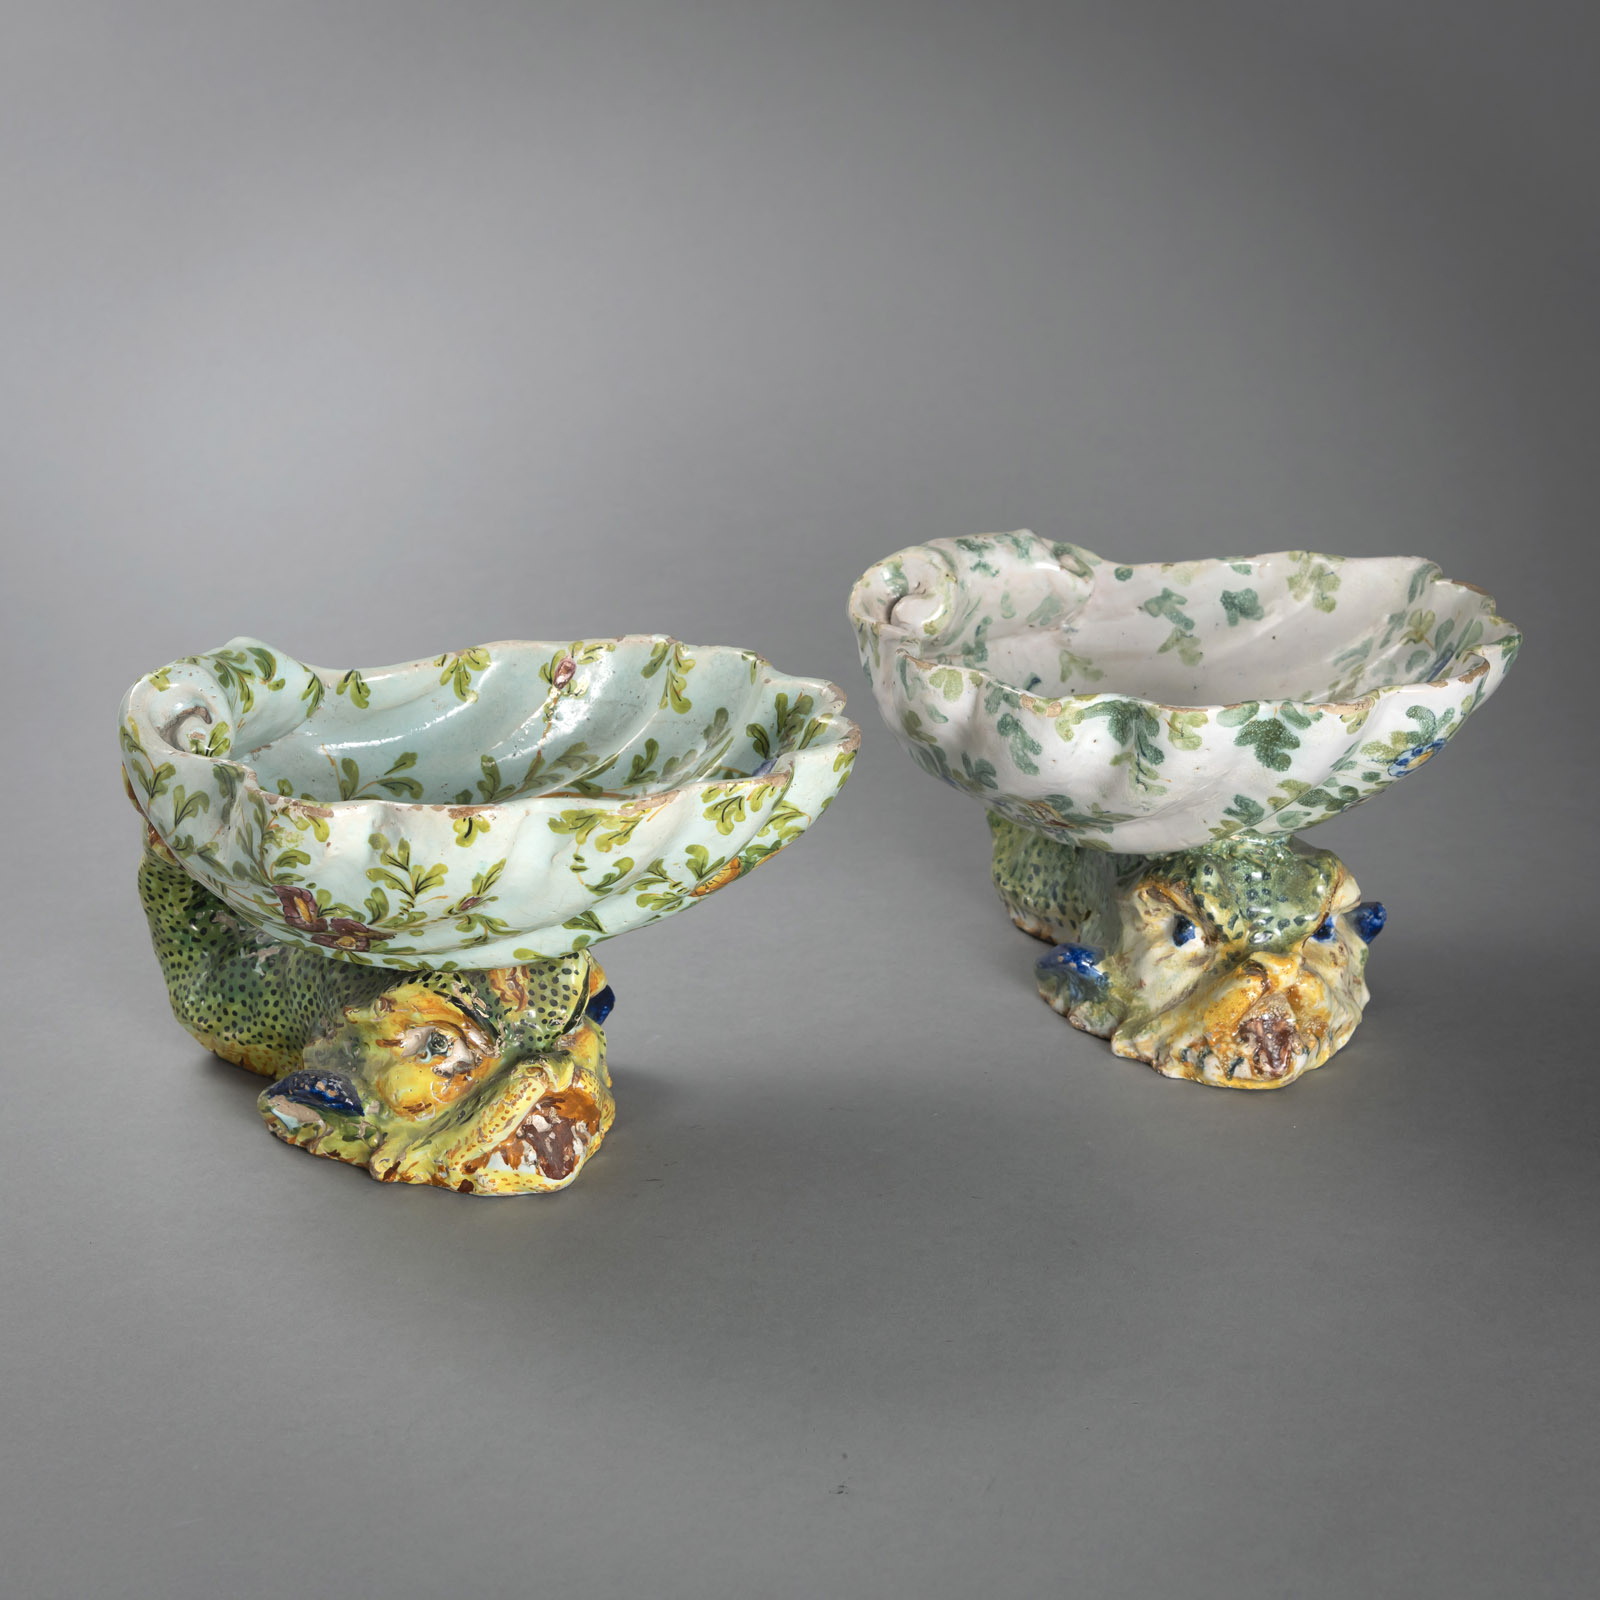 A PAIR OF SHELL SHAPED FOOTED BOWLS WITH DOLPHIN FEET